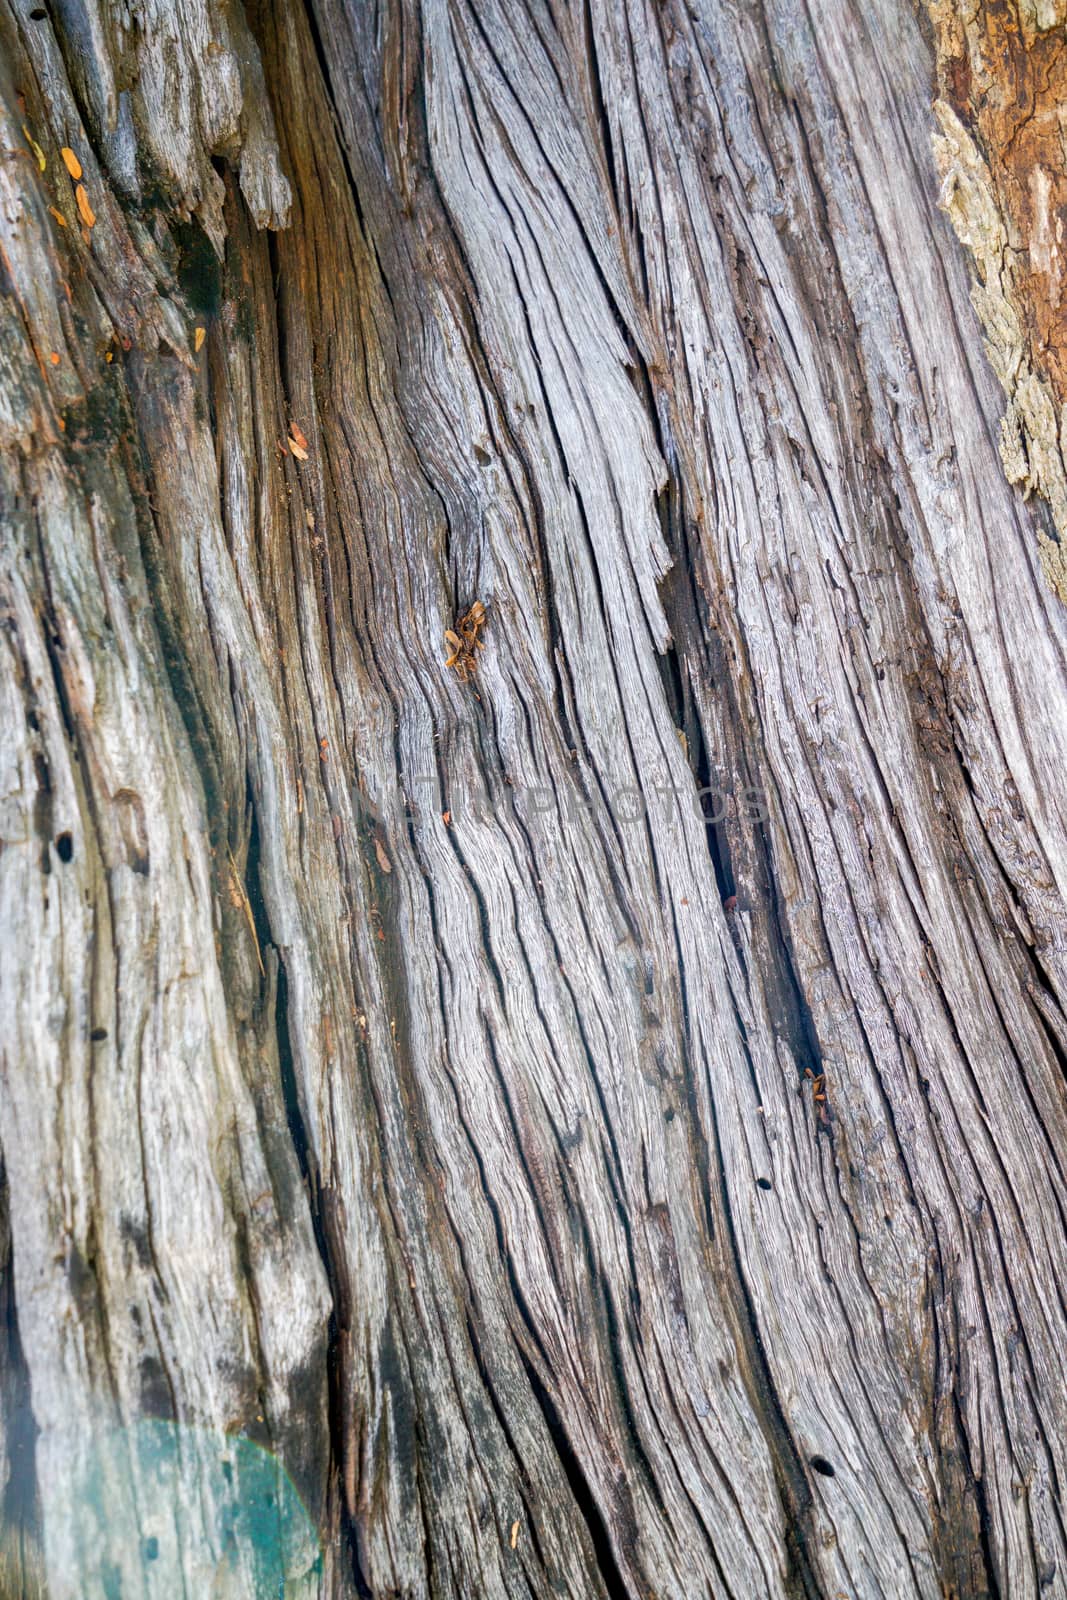 Texture & details of of tree trunk